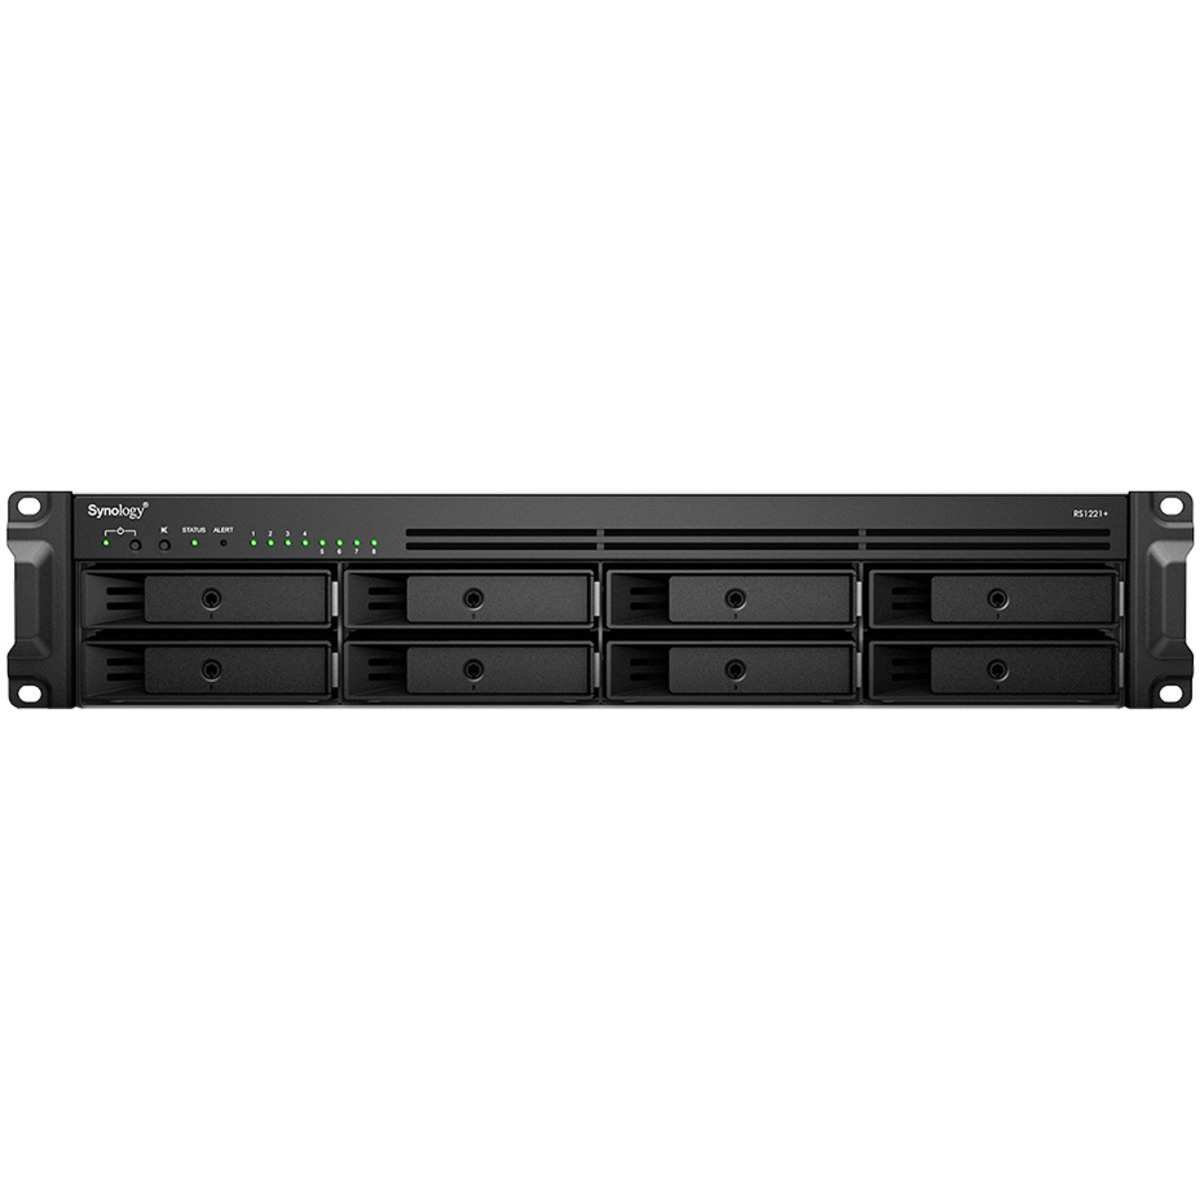 Synology RackStation RS1221RP+ 16tb 8-Bay RackMount Multimedia / Power User / Business NAS - Network Attached Storage Device 4x4tb Western Digital Red Pro WD4003FFBX 3.5 7200rpm SATA 6Gb/s HDD NAS Class Drives Installed - Burn-In Tested - FREE RAM UPGRADE RackStation RS1221RP+